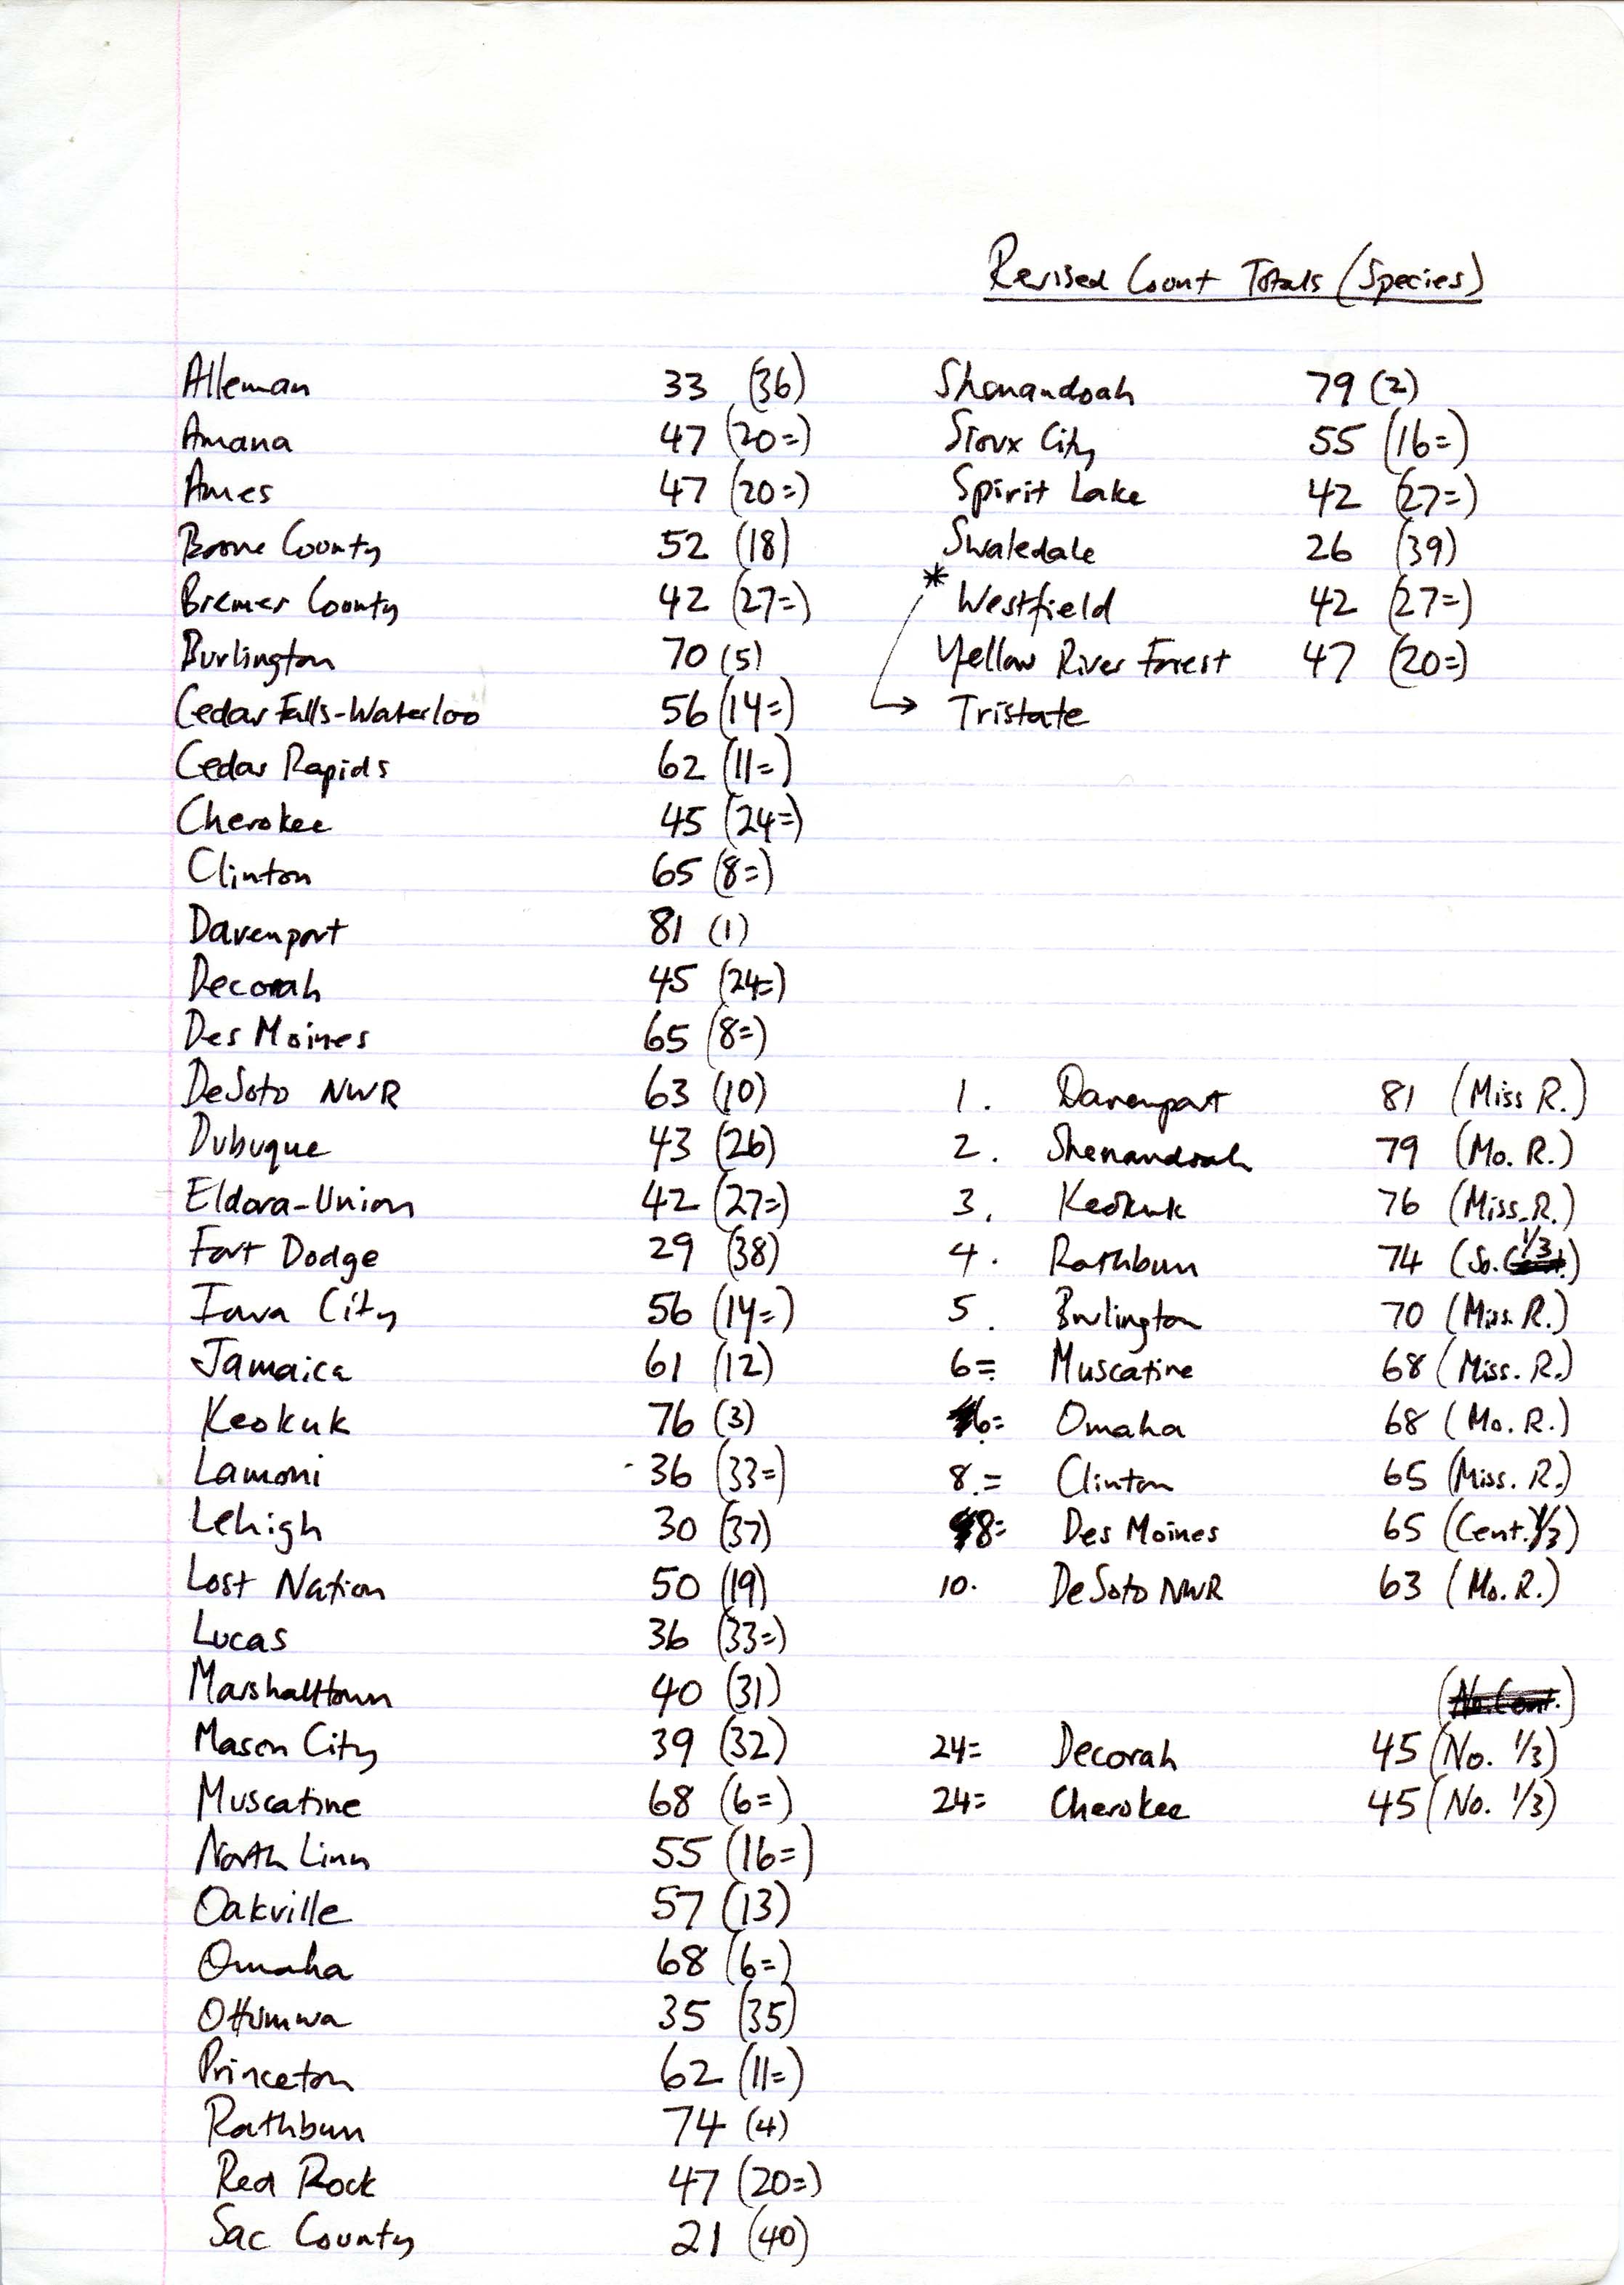 Christmas bird count data report and W. Ross Silcock note to Thomas H. Kent, winter 1987-1988